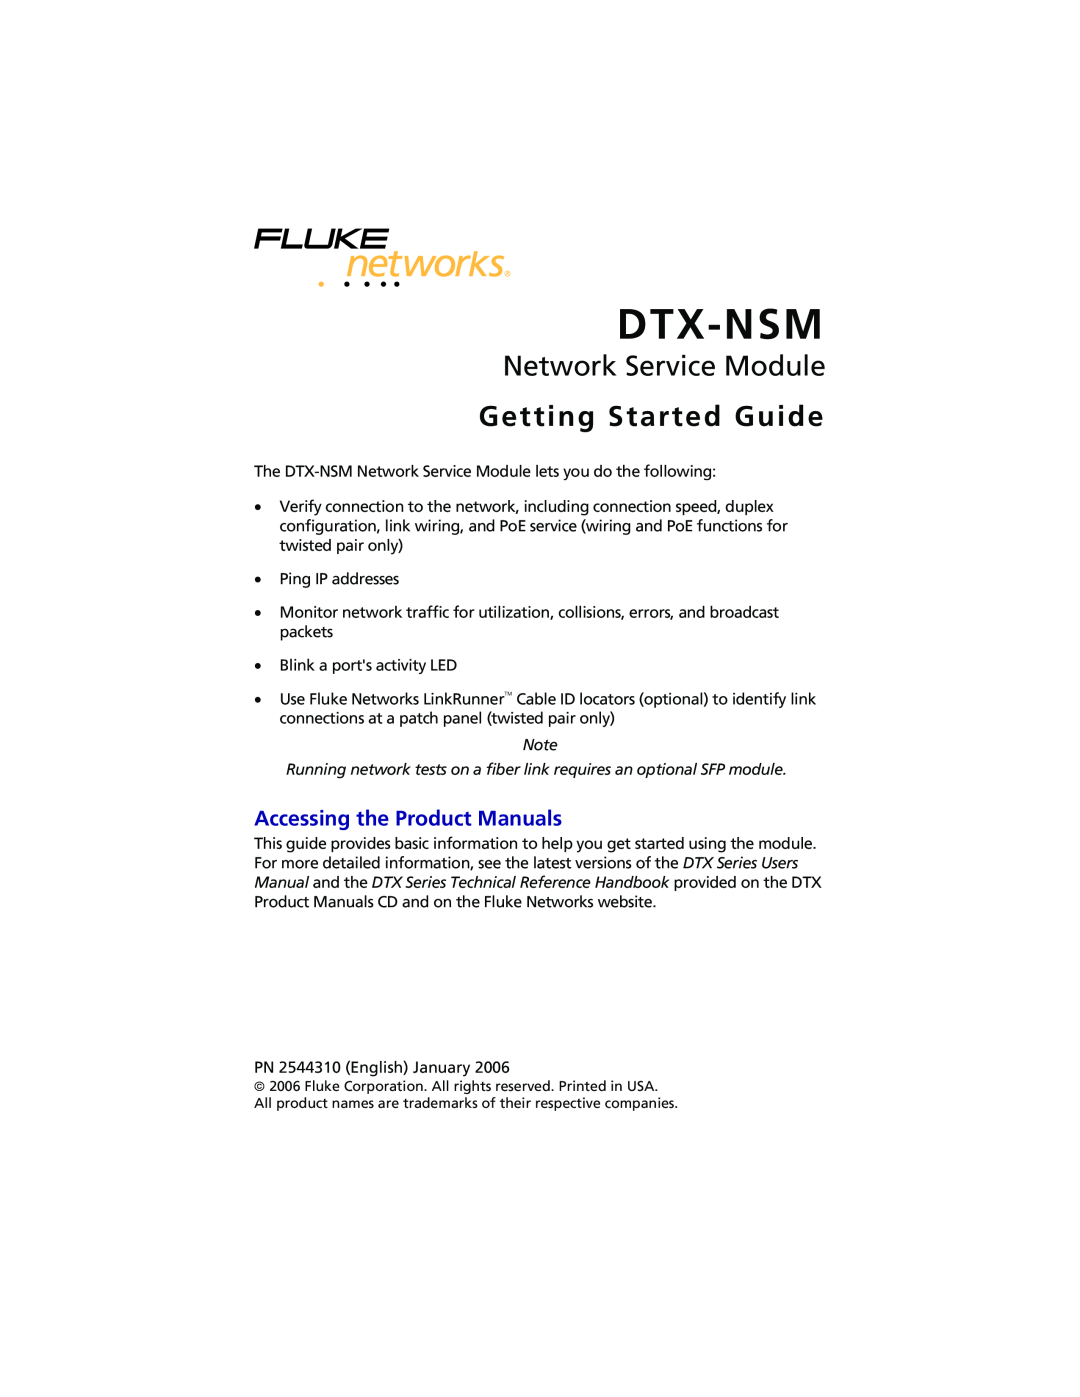 Fluke DTX-NSM instruction sheet Accessing the Product Manuals, Dtx-Nsm, Network Service Module, Getting Started Guide 